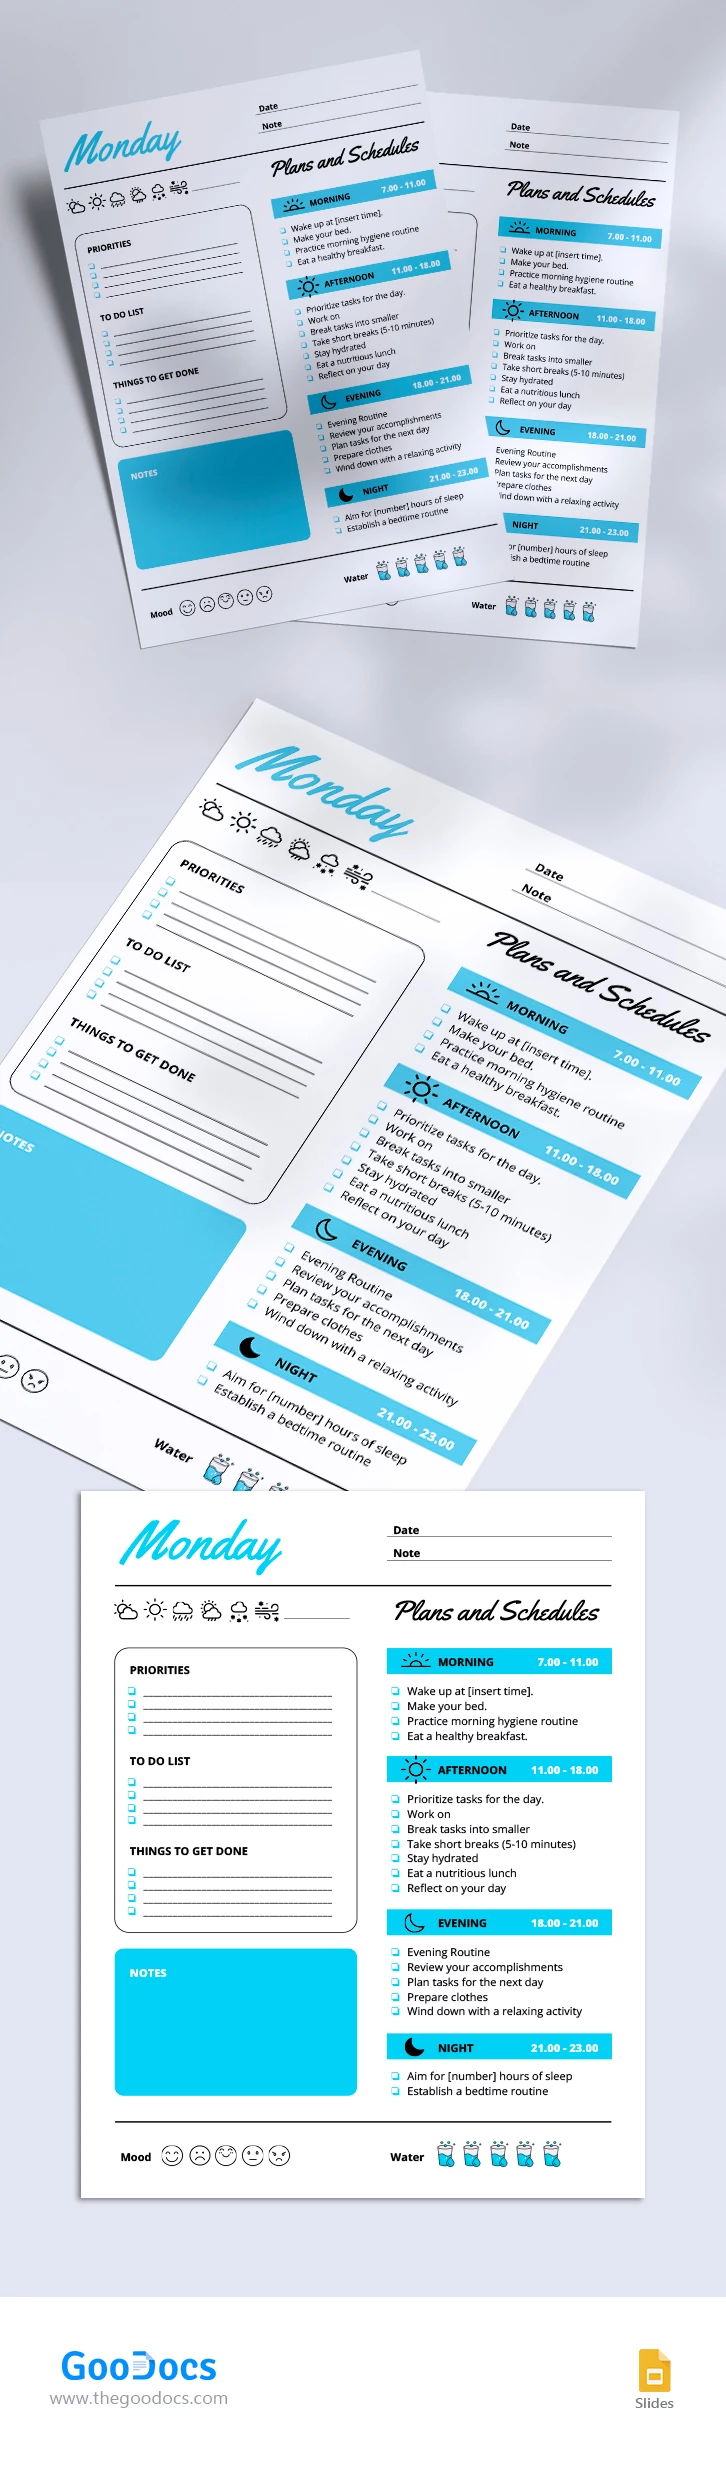 Daily Notes - free Google Docs Template - 10067658